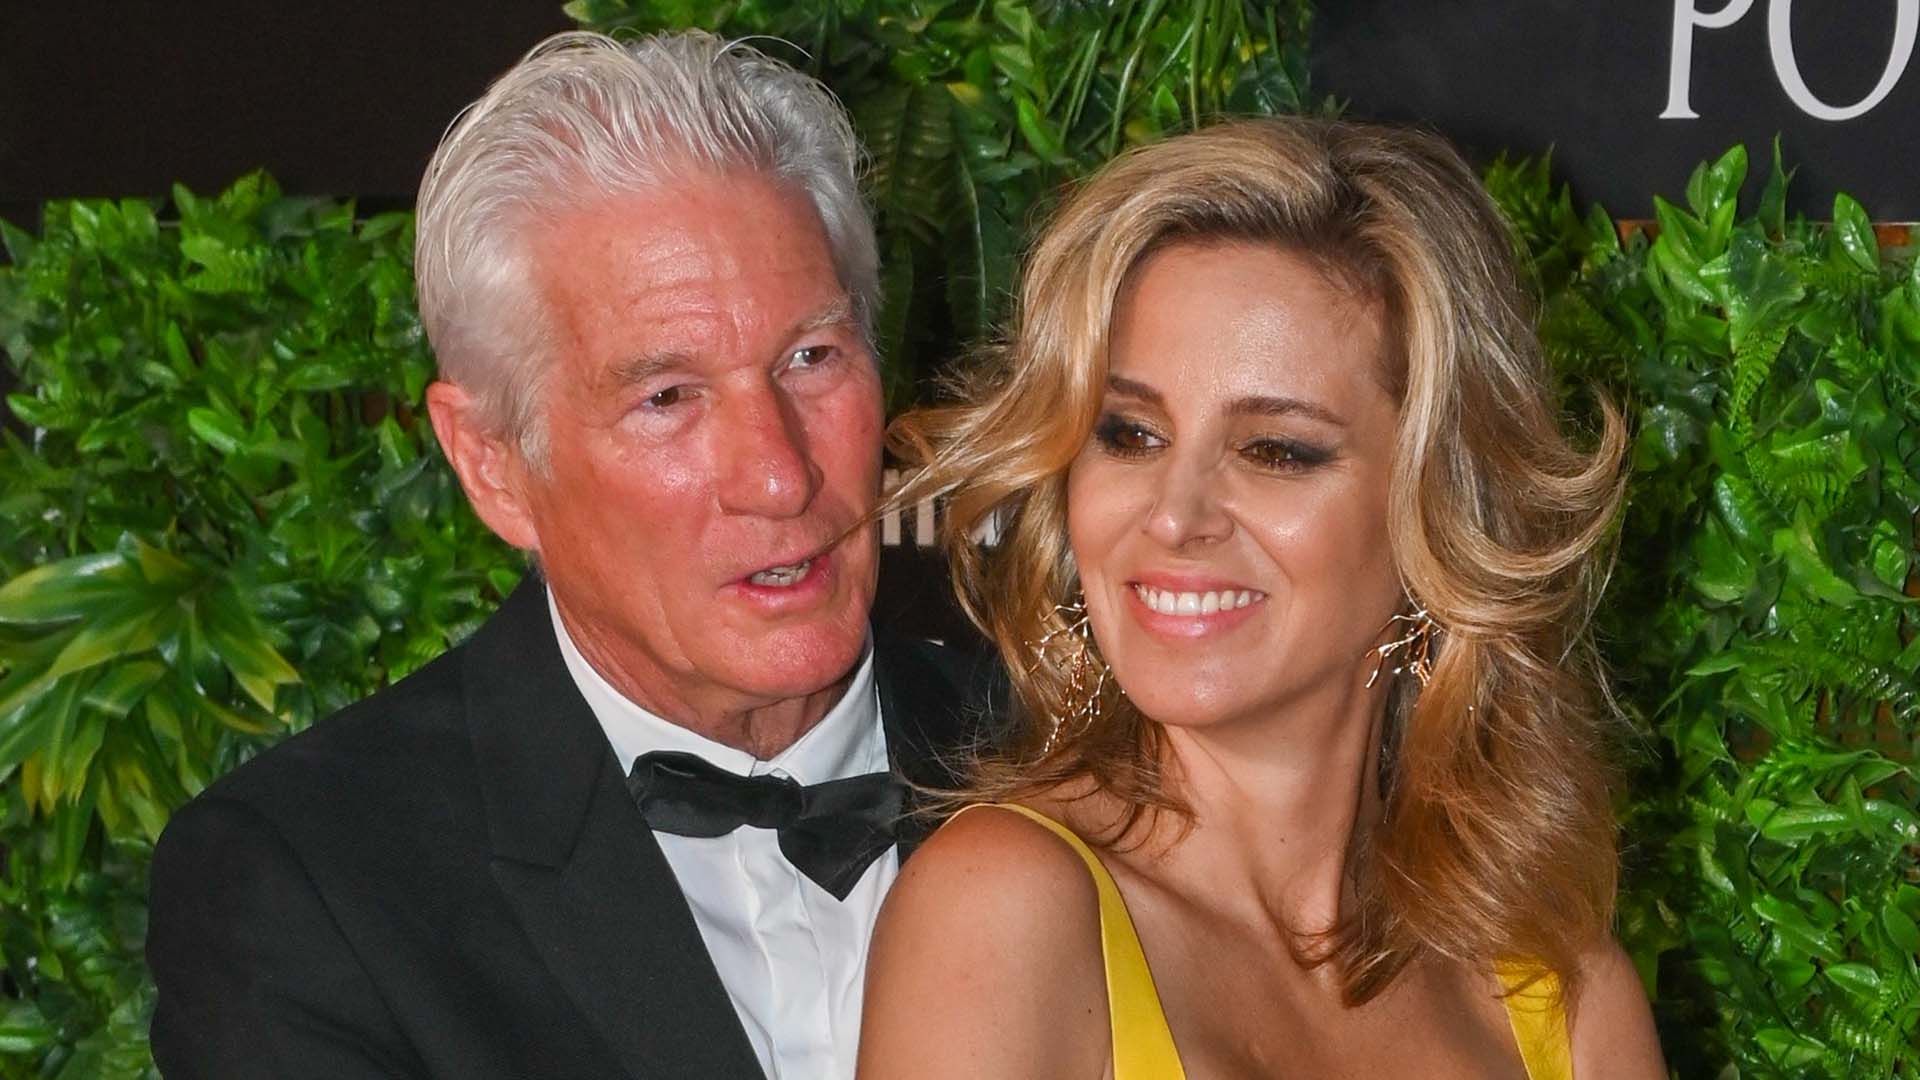 Alejandra Silva and Actor Richard Gere at photocall Starlite Festival oF Marbella on Sunday 14 August 2022